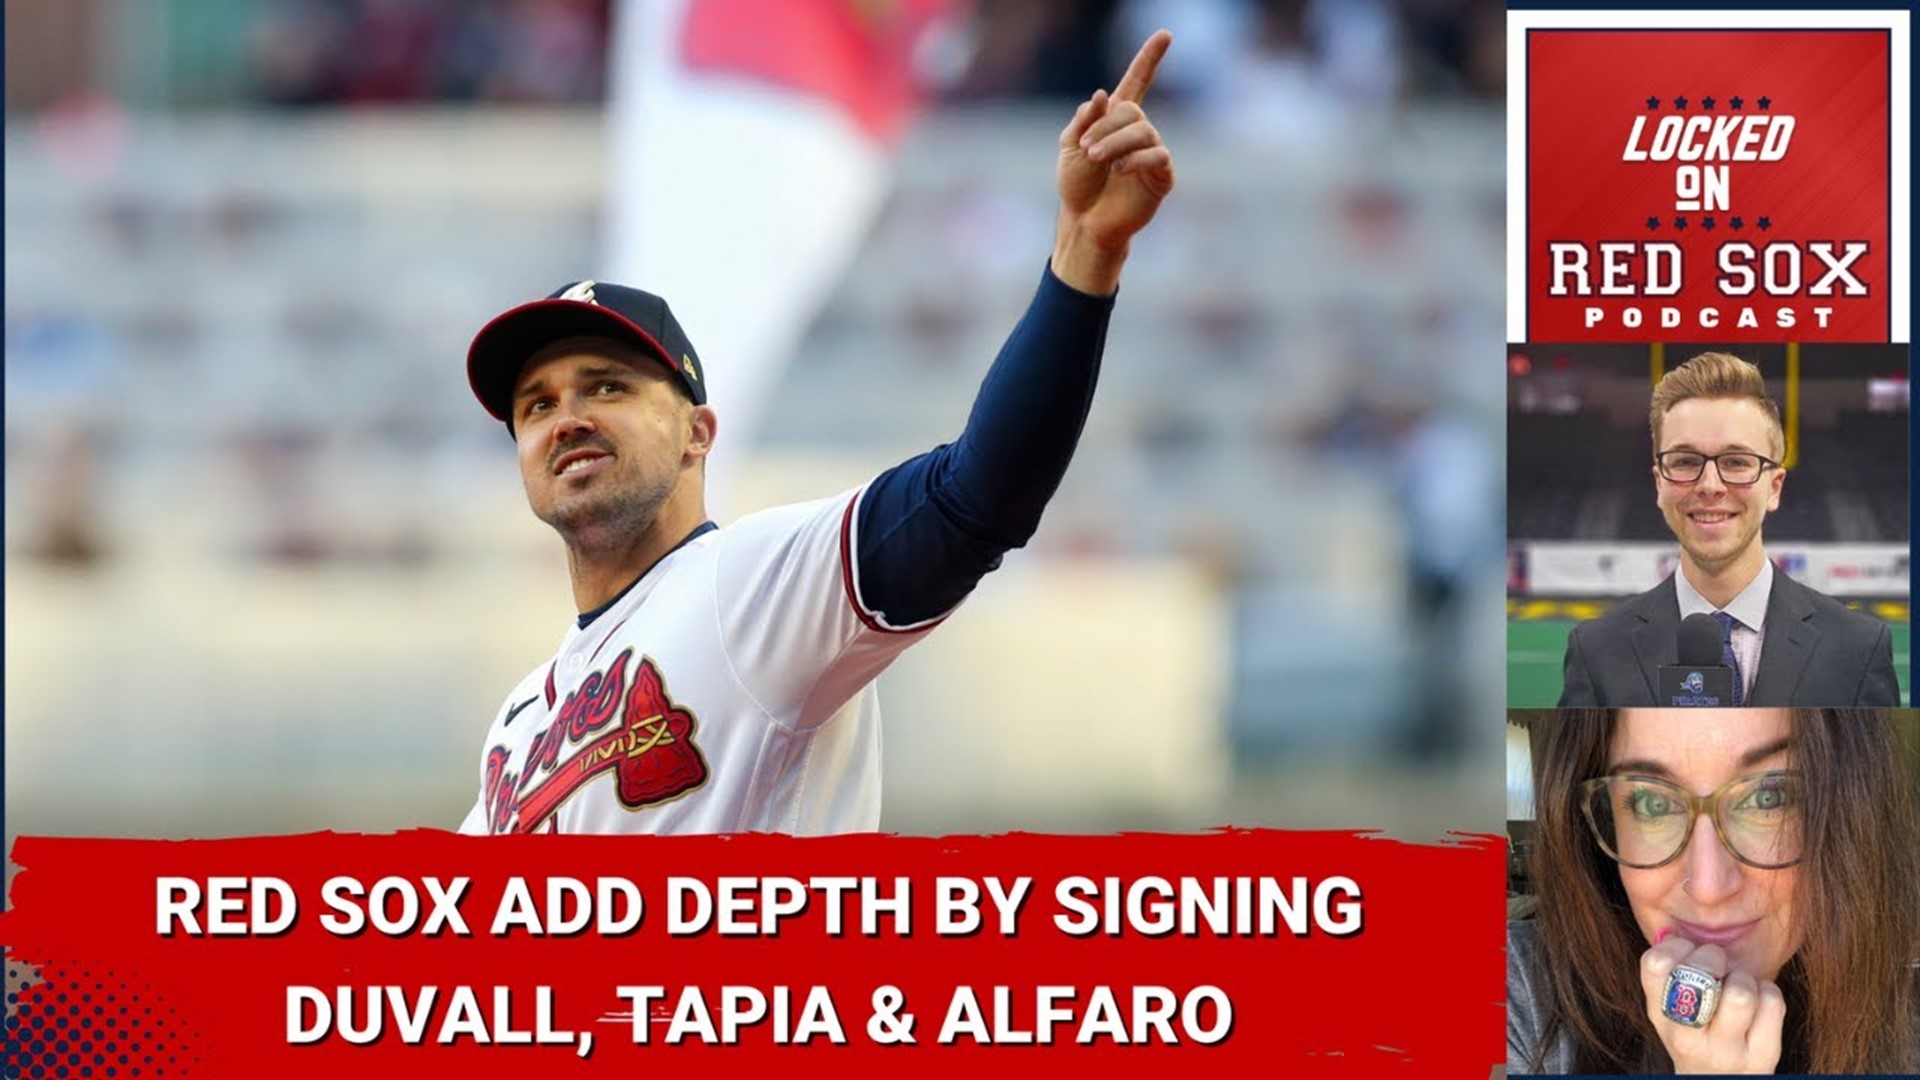 As the offseason winds down, the Red Sox continue to add depth to their 2023 roster by signing Adam Duvall and Raimel Tapia as well as Jorge Alfaro.